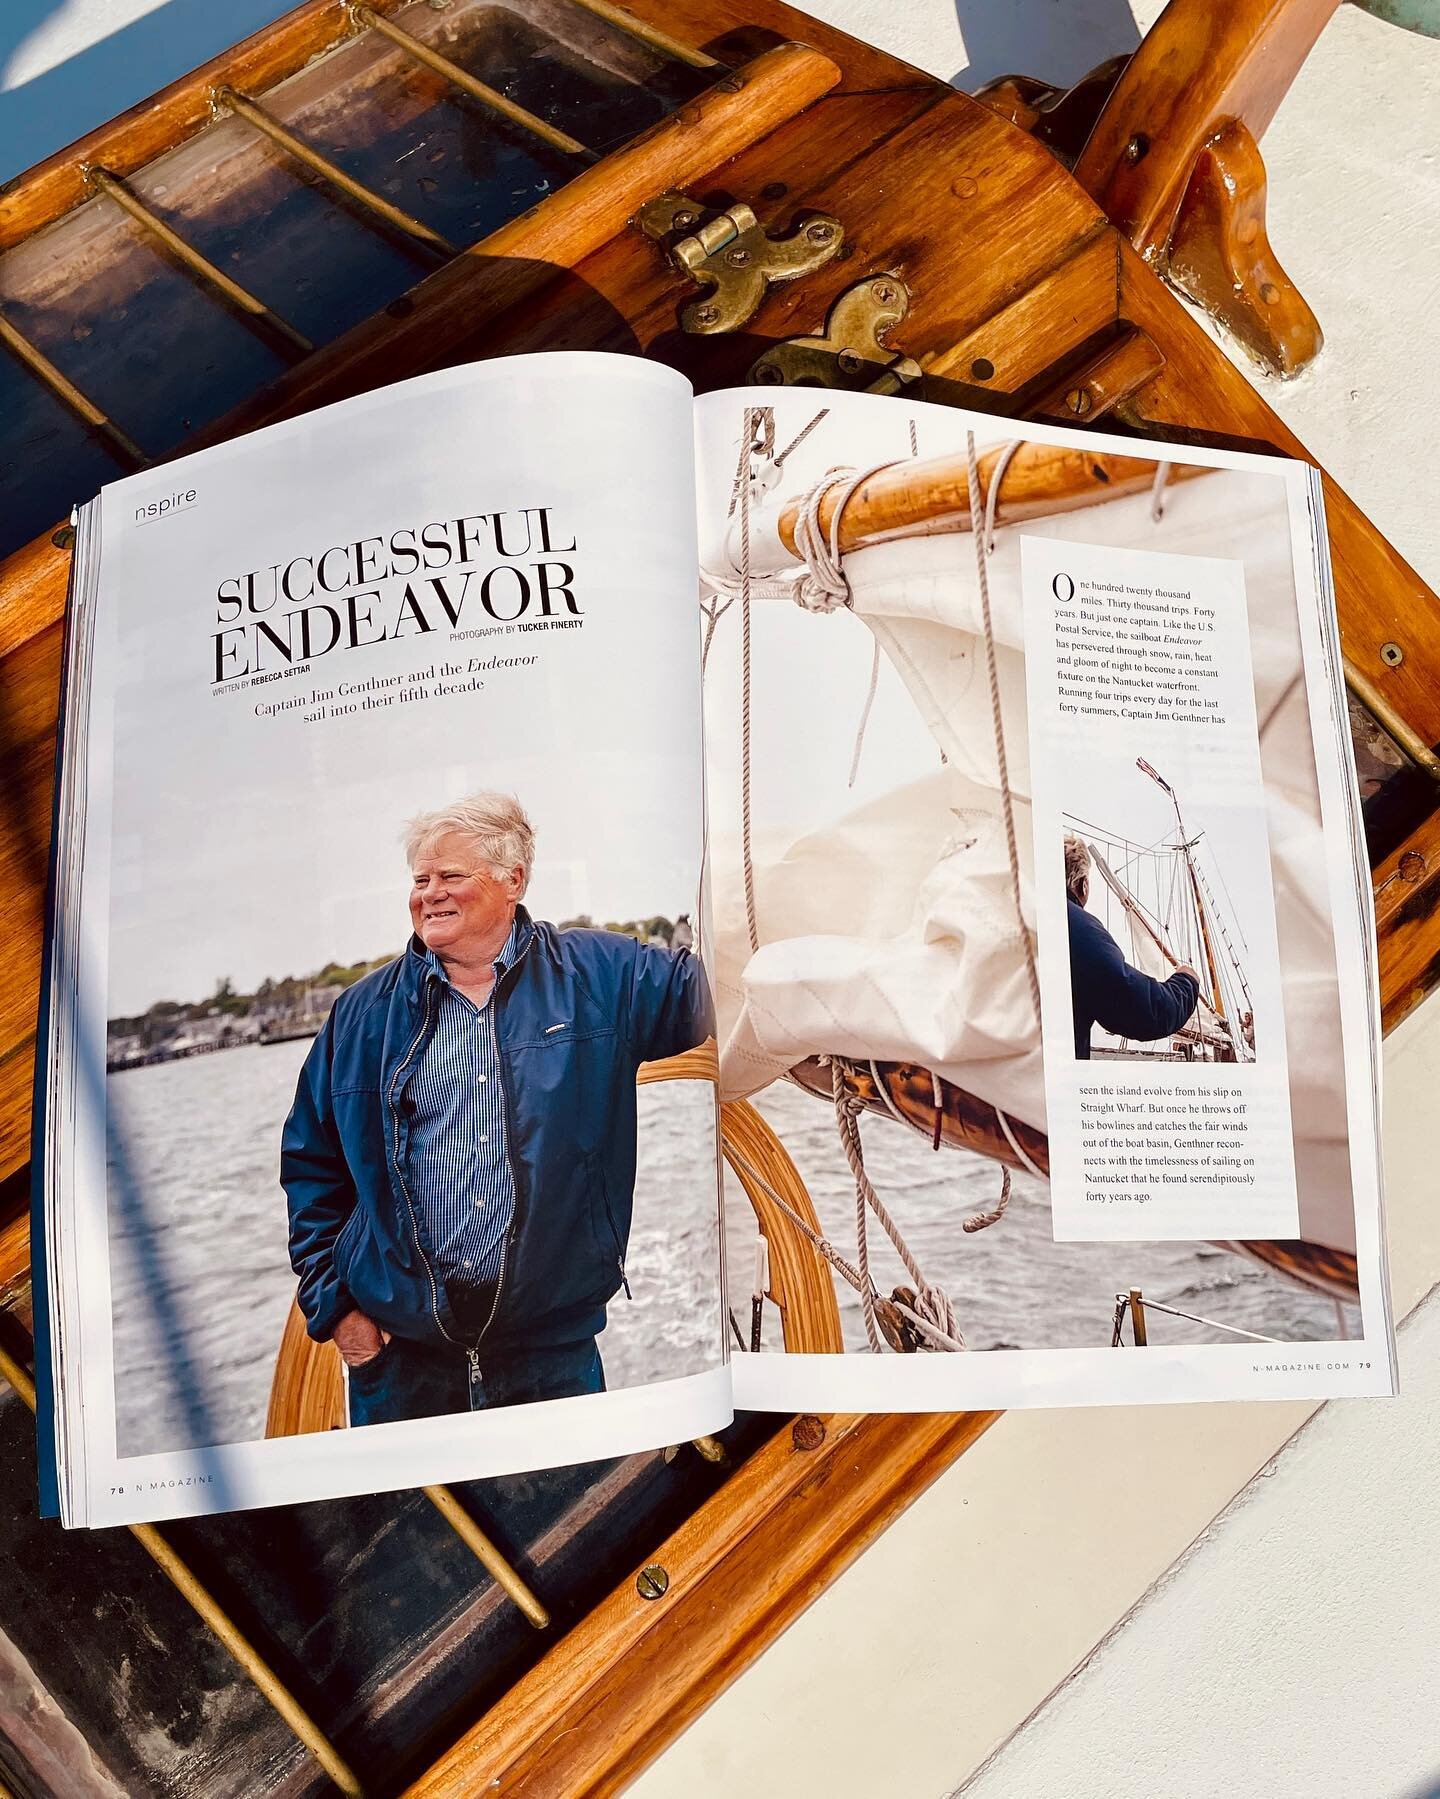 Check us out in the latest issue of N magazine (link in bio)! It&rsquo;s fantastic to see the Endeavor story in Here&rsquo;s to 40 years in business, and over 30,000 trips around Nantucket sound. As Captain Jim would say &ldquo;that&rsquo;s a lot of 